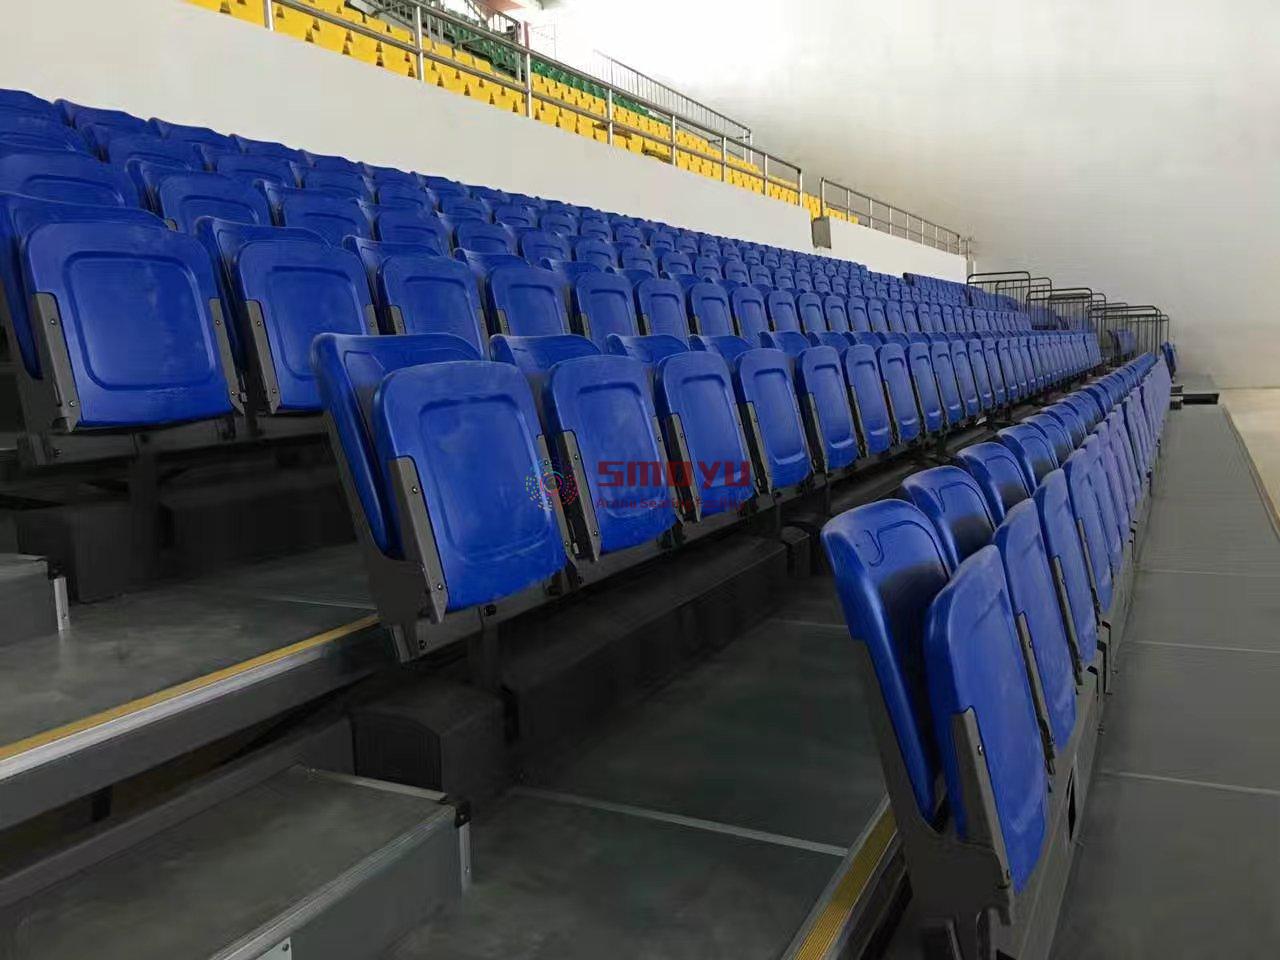 bleachers <a href=https://www.arena-seating.com/Telescopic-Seating.html target='_blank'><a href=https://www.arena-seating.com/Telescopic-Seating.html target='_blank'>Telescopic seat</a>ing</a>